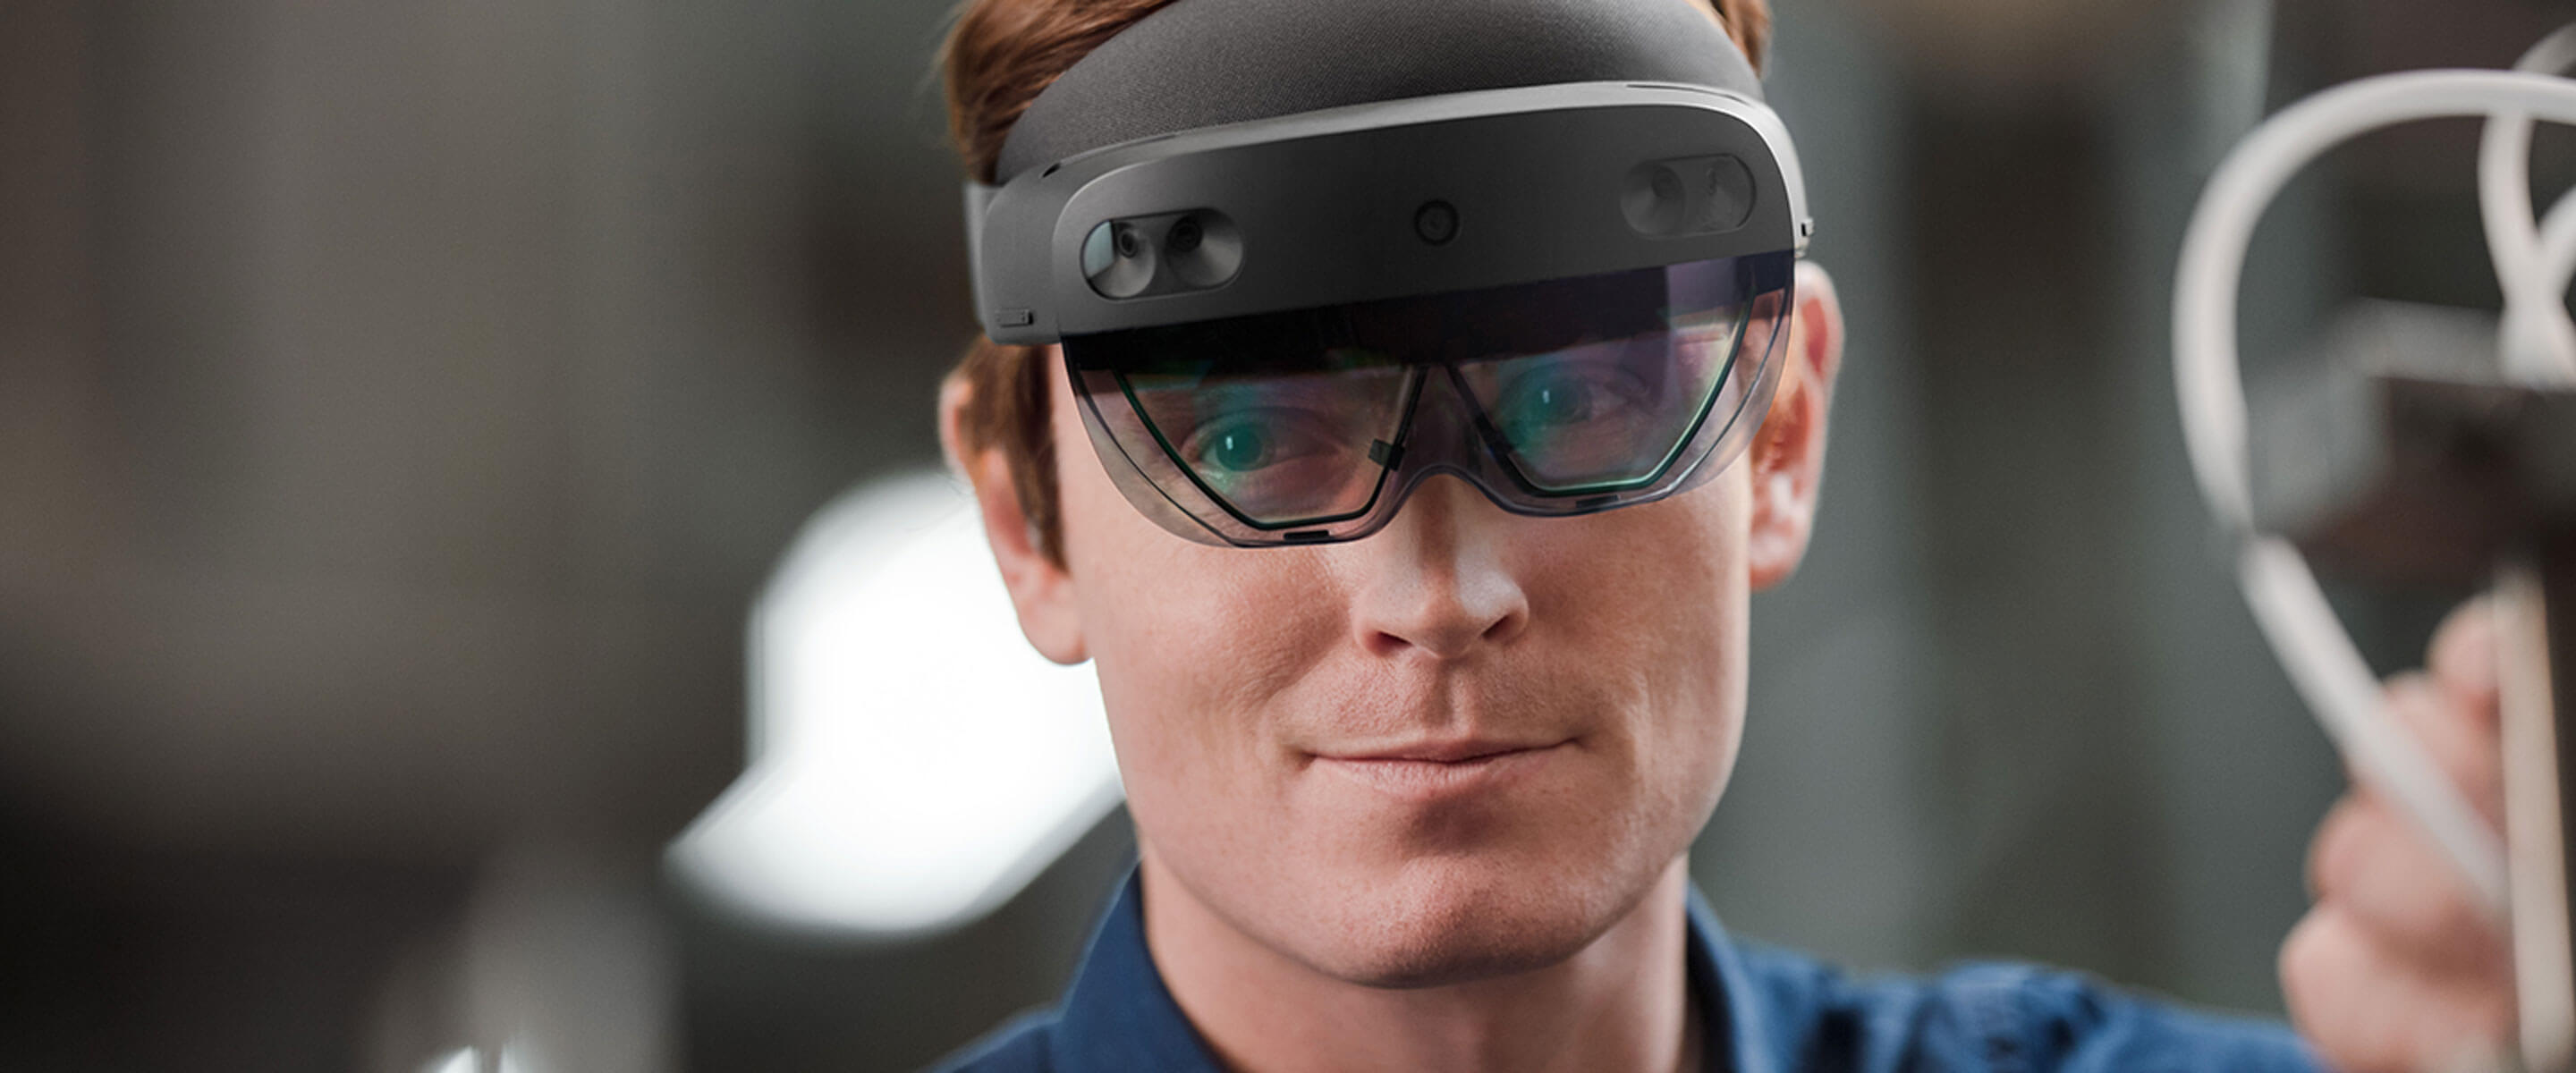 All you need to know on HoloLens 2